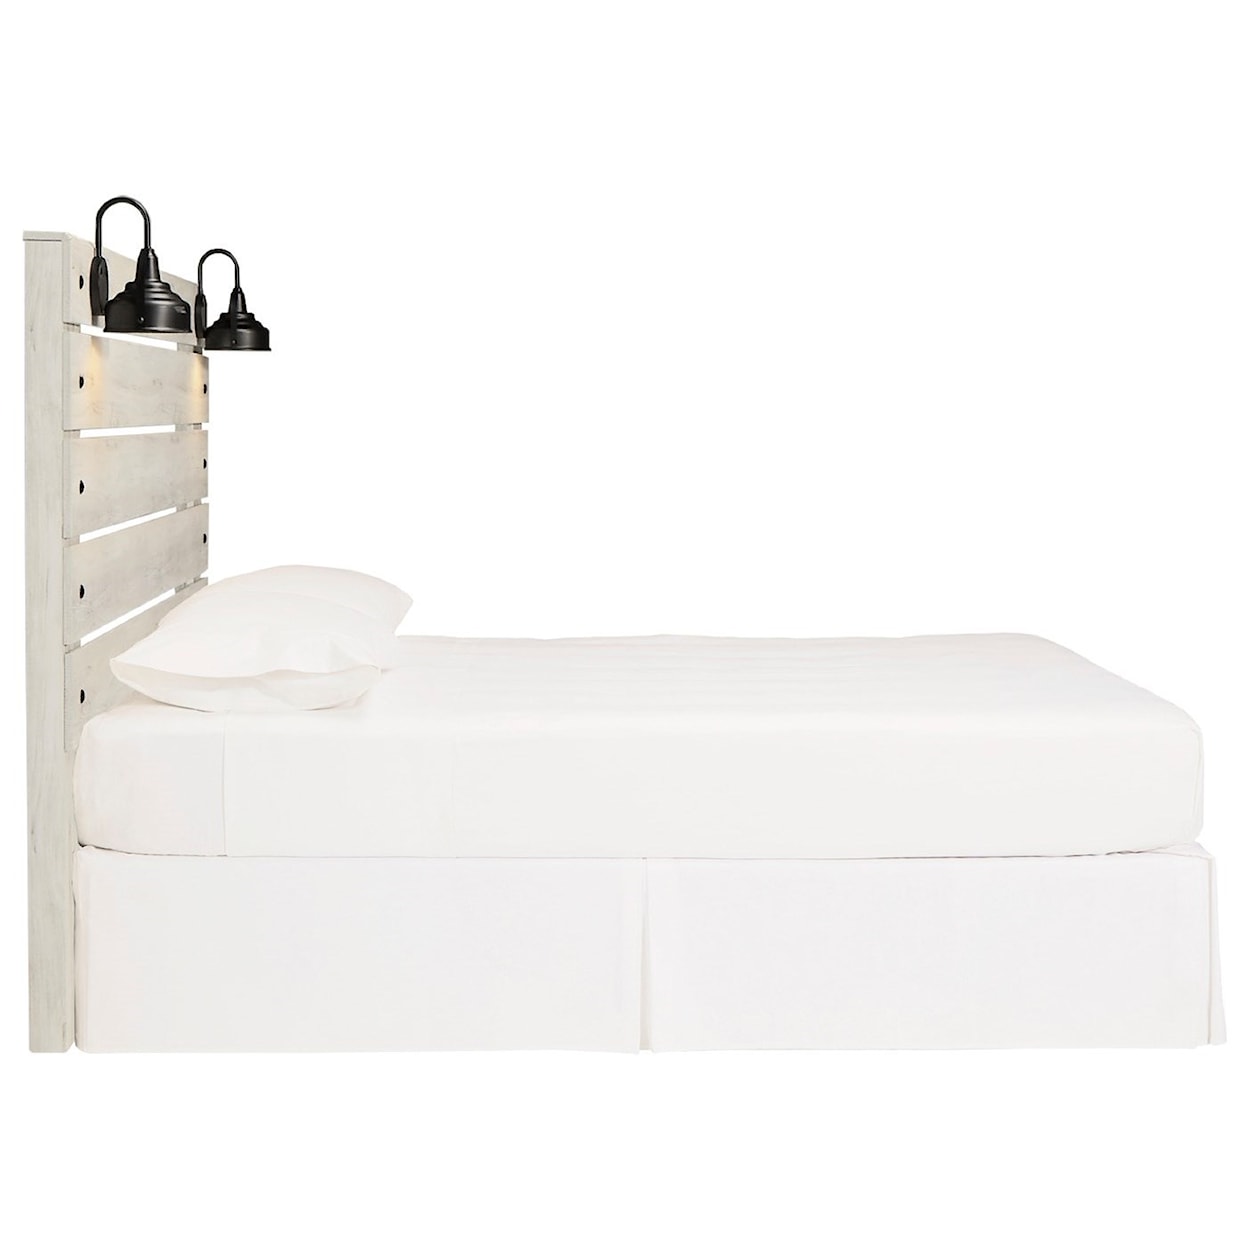 Signature Design by Ashley Furniture Cambeck King Panel Headboard